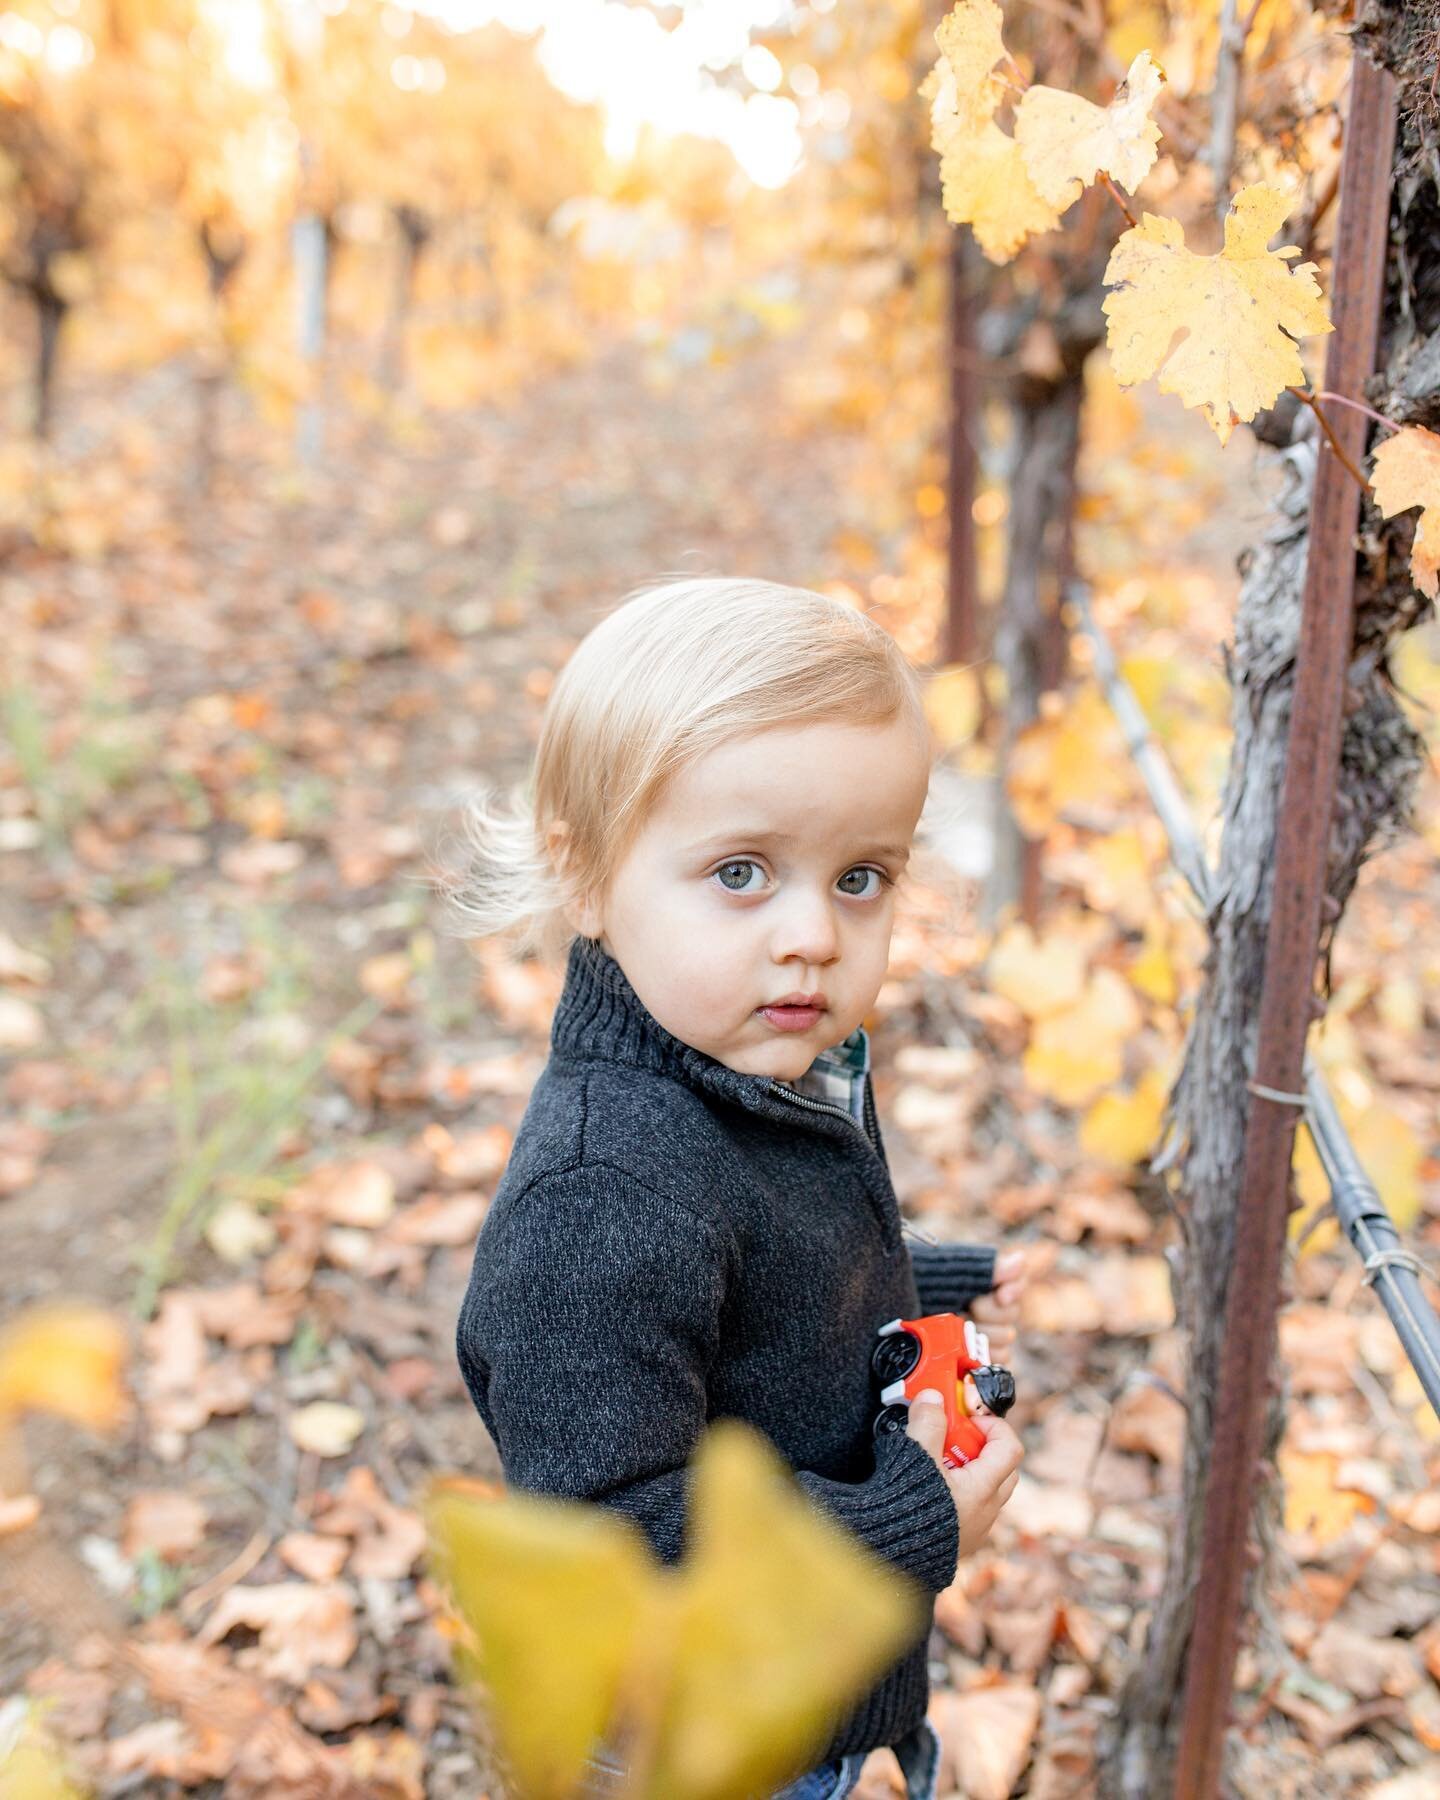 I love taking a few minutes to follow my toddler clients around and capture little expressions like this, some silly and some perfectly precious.